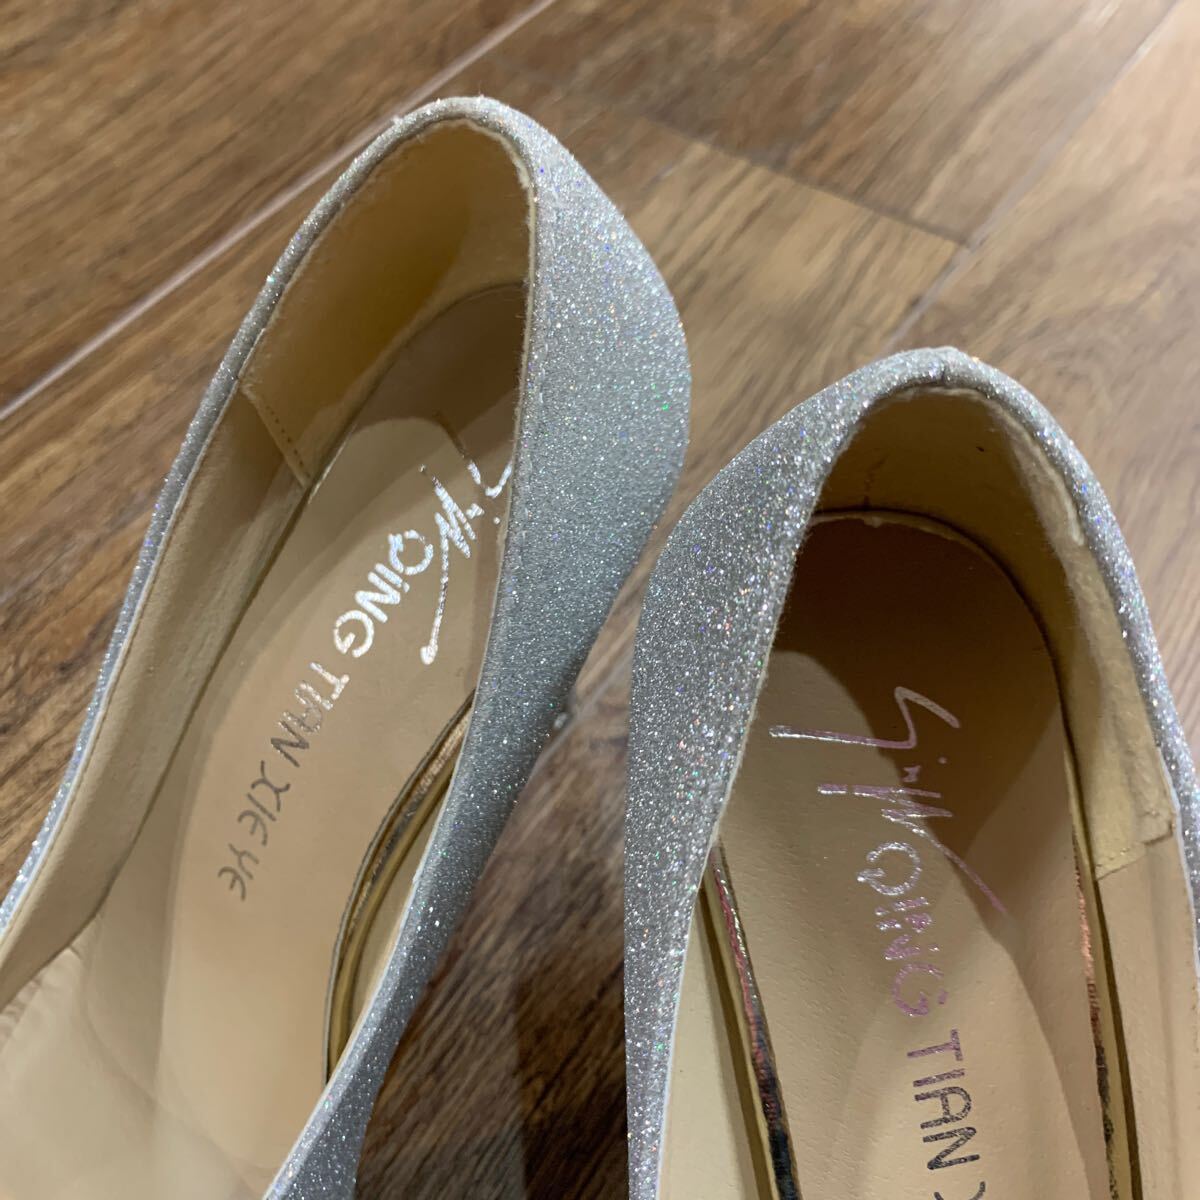  new goods beautiful goods approximately 10cm heel Kirakira lame pumps silver 24cm 24 centimeter 10 centimeter silver color high heel pin heel red sole lady's shoes 